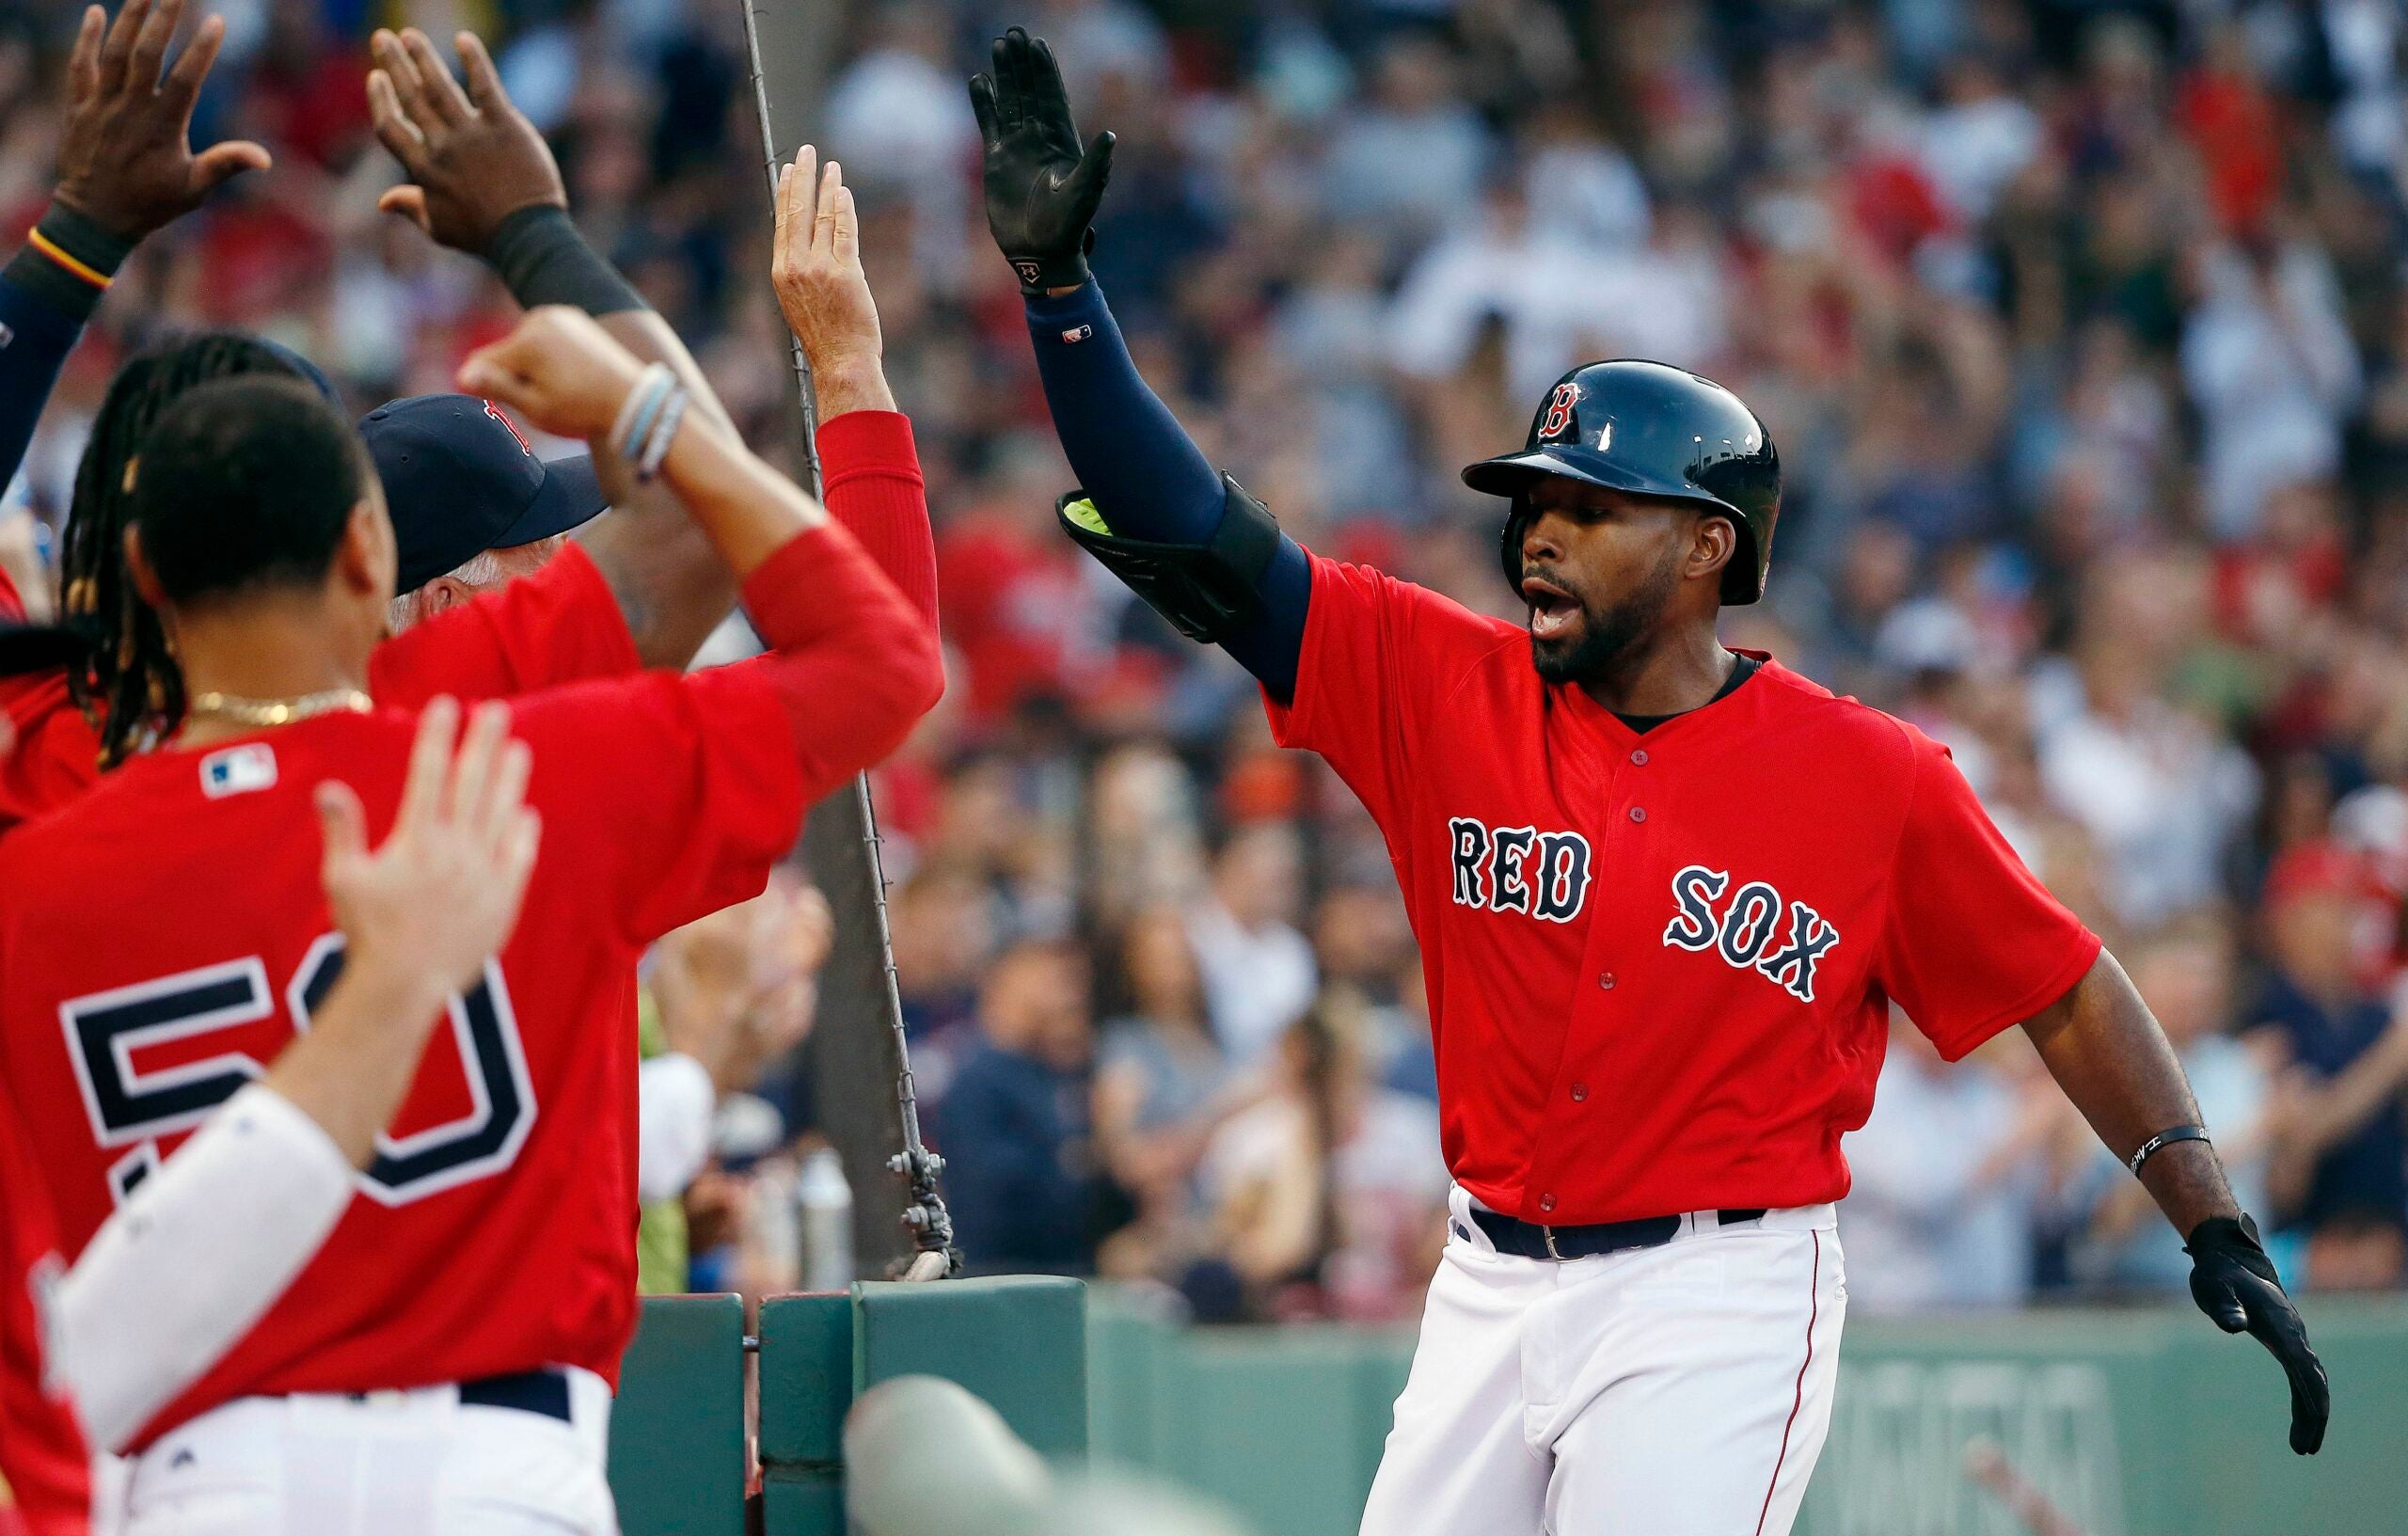 Jackie Bradley Jr.'s wife Erin gives birth to a baby girl